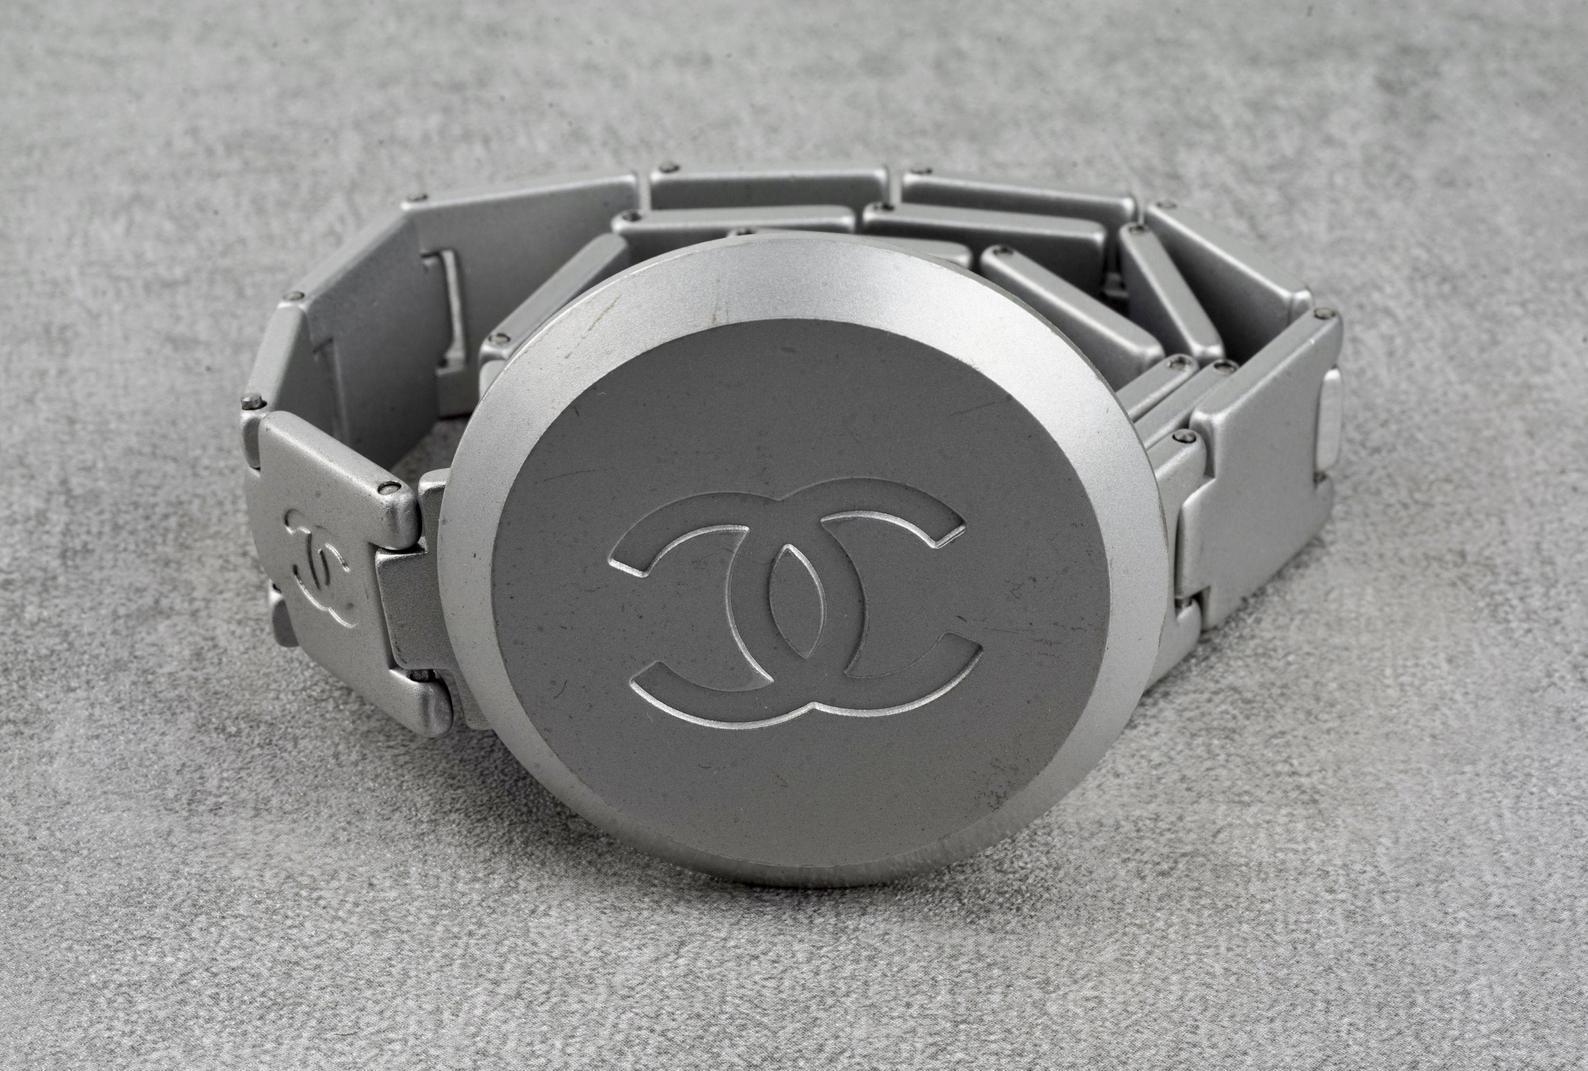 Vintage CHANEL Logo Futuristic Matte Silver Articulated Belt

Measurements:
Buckle Diameter: 1.97 inches (5 cm)
Strap Height: 0.78 inch (2 cm)
Wearable Length: 26.96 inches (68.5 cm)
Total Length: 27.95 inches (71 cm)

Features:
- 100% Authentic